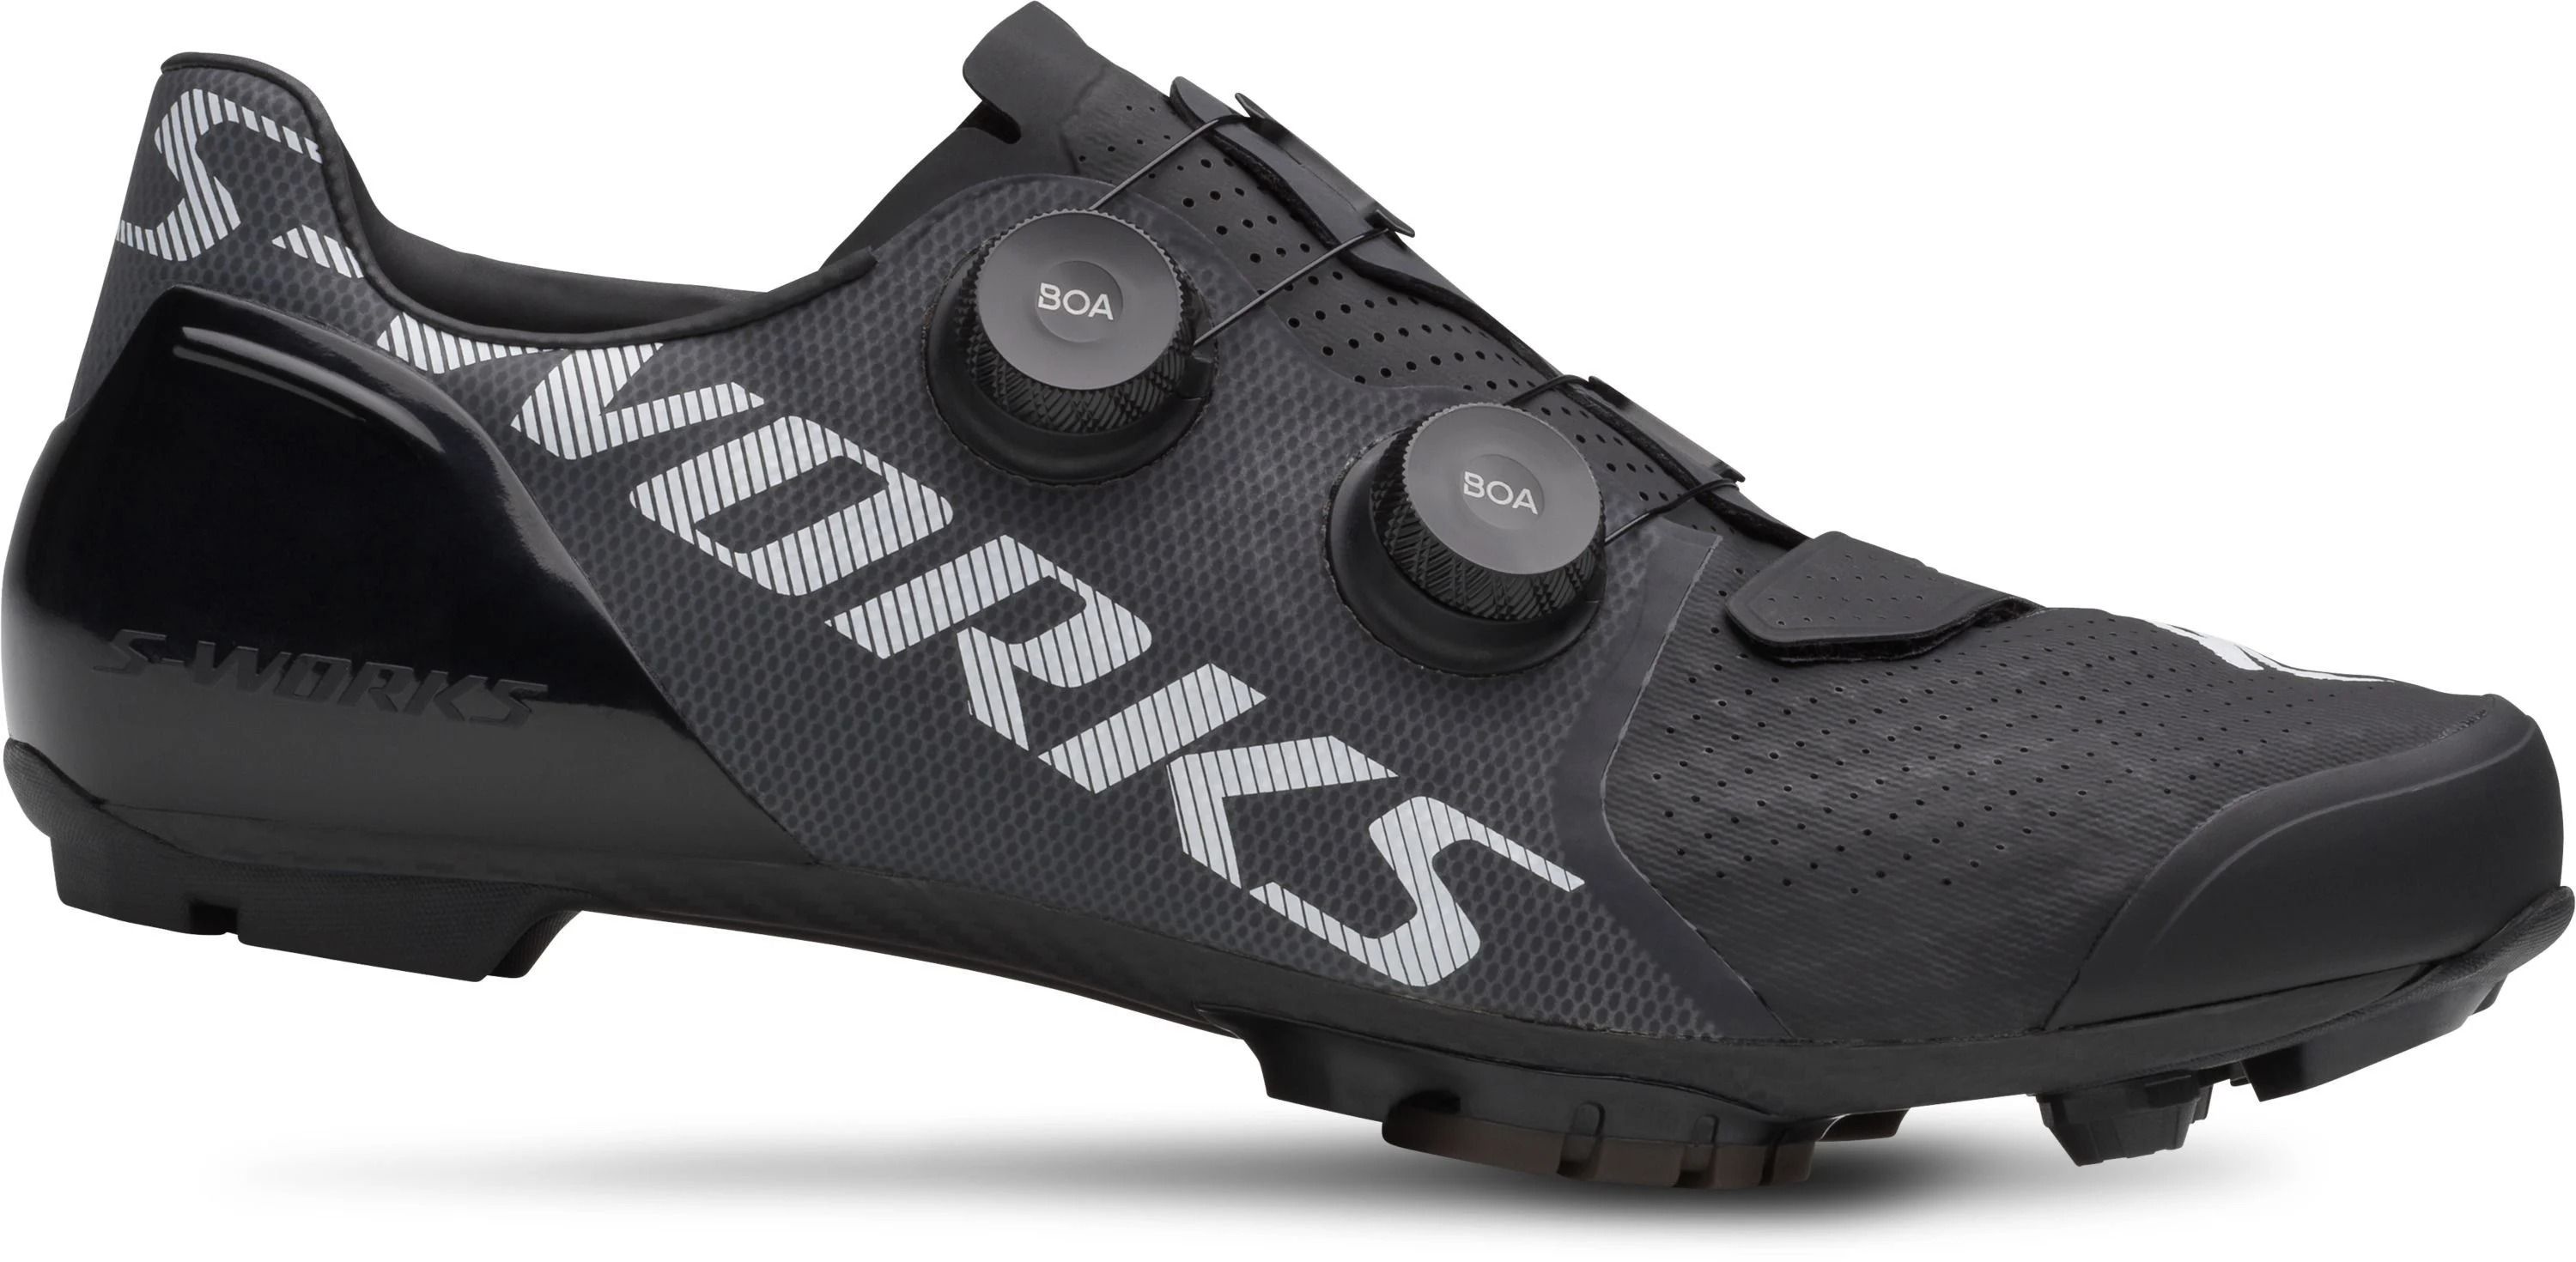 specialized s works recon shoes